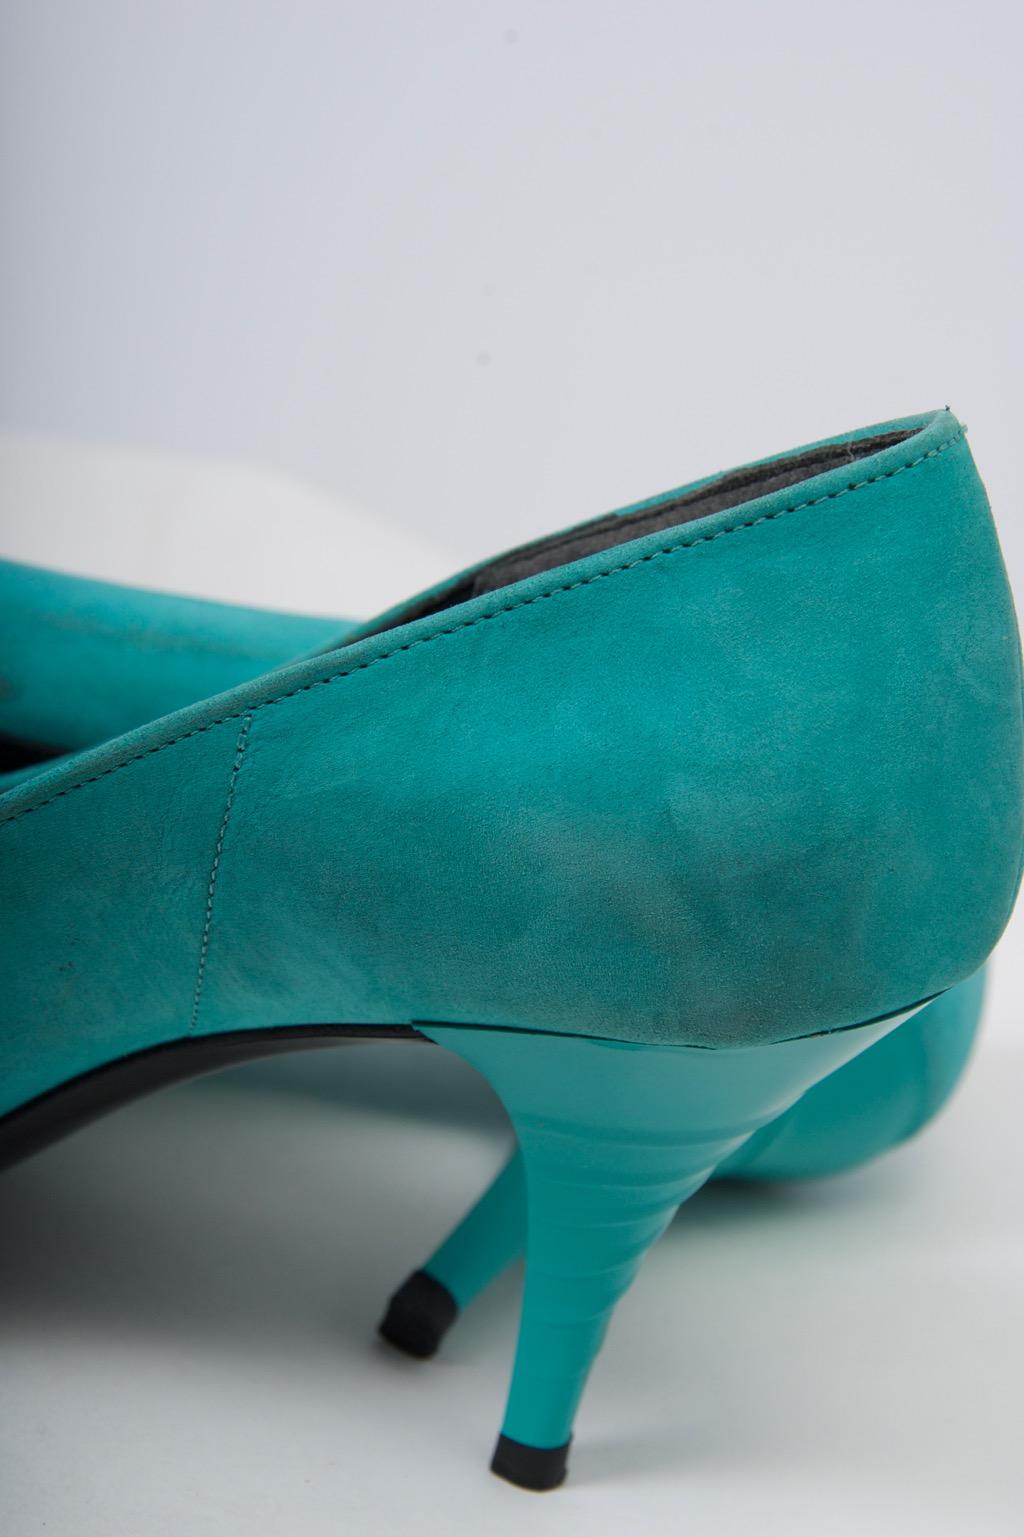 Women's Turquoise Suede 1980s Pumps by Seducta For Sale